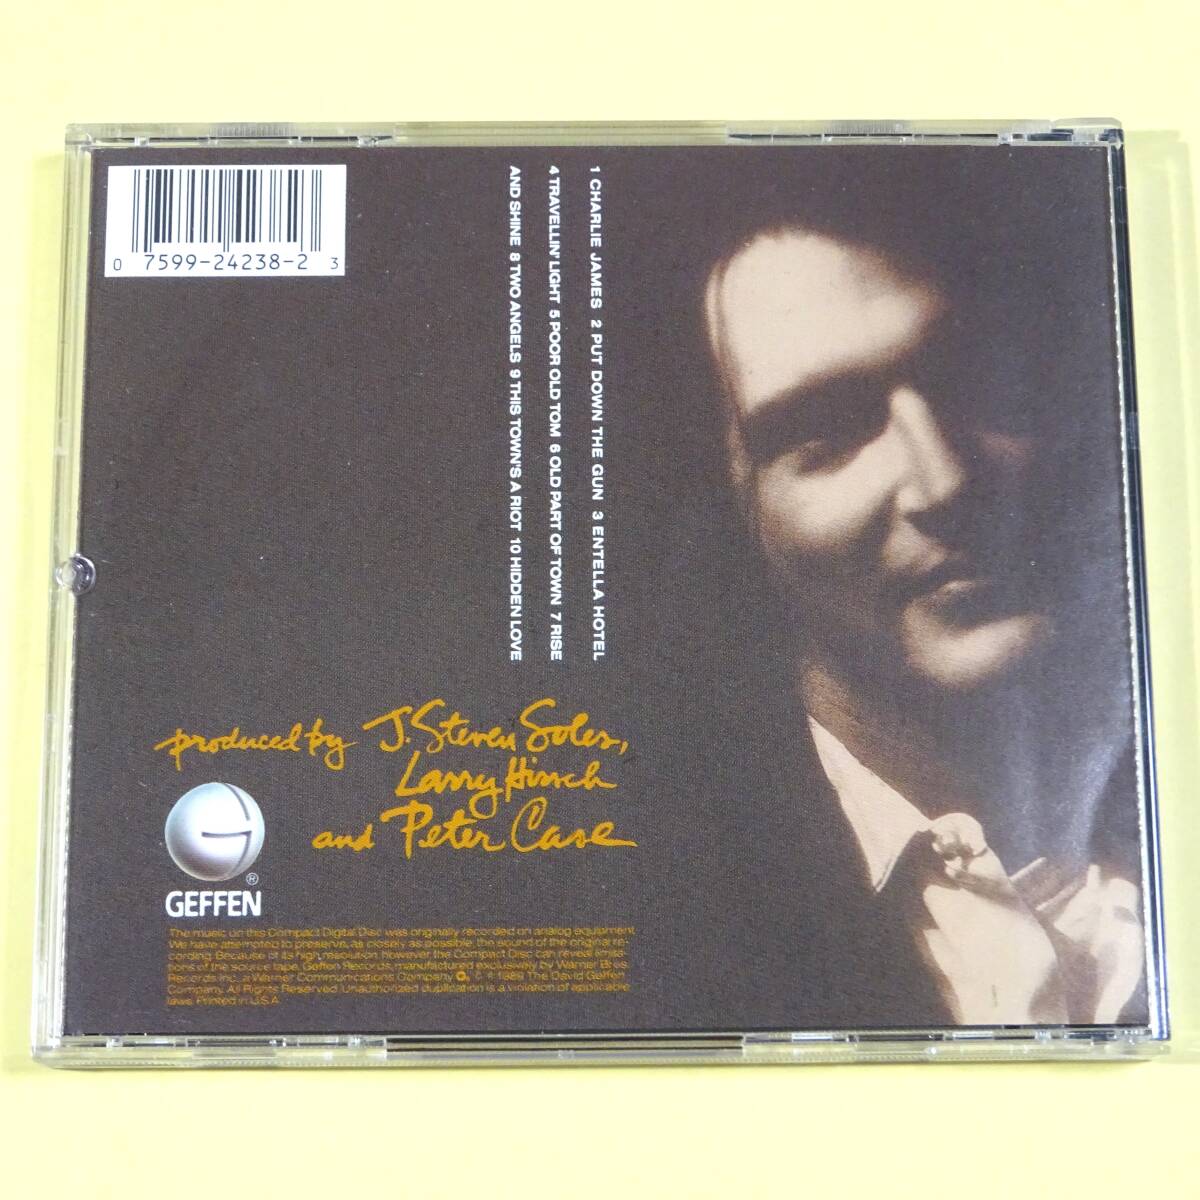 ◆CD　ピーター・ケイス / ブルー・ギター　PETER CASE / THE MAN WITH THE BLUE POSTMODERN FRAGMENTED NEO-TRADITIONALIST GUITAR 1989年_画像2